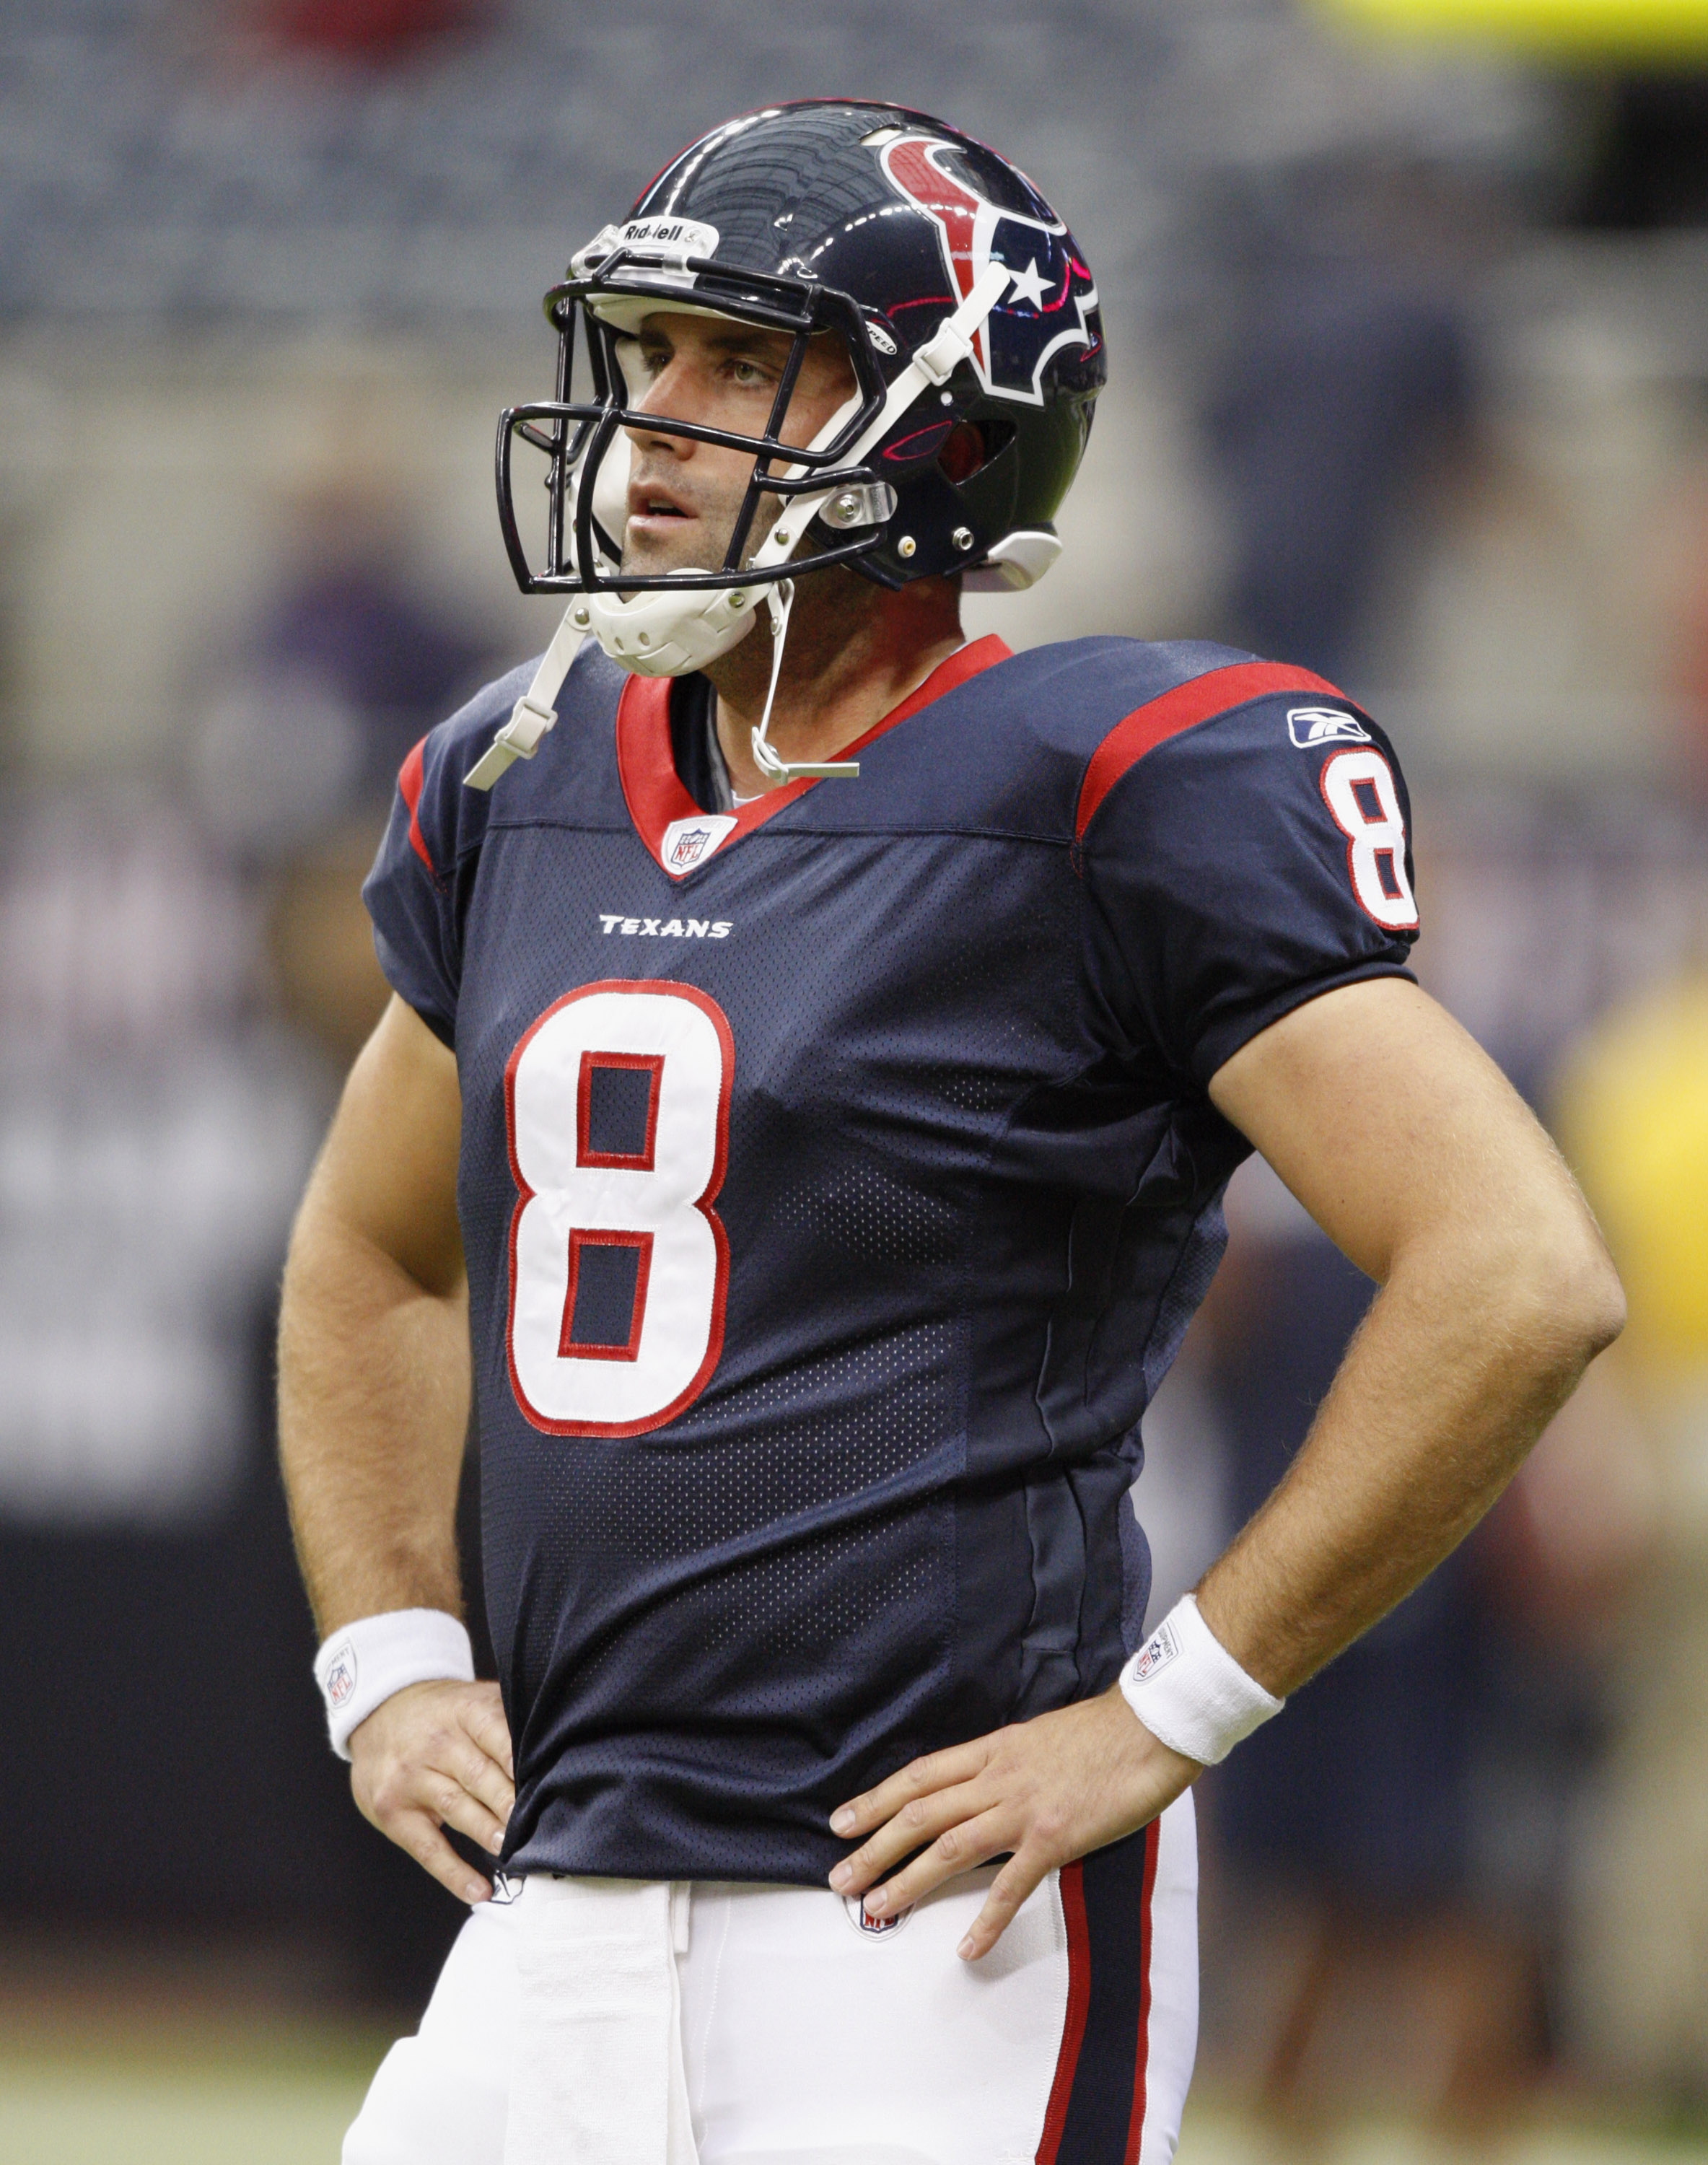 HOUSTON - SEPTEMBER 02:  Quarterback Matt Schaub #8 of the Houston Texans warms up before a preseason game against the Tampa Bay Buccaneers at Reliant Stadium on September 2, 2010 in Houston, Texas.  (Photo by Bob Levey/Getty Images)